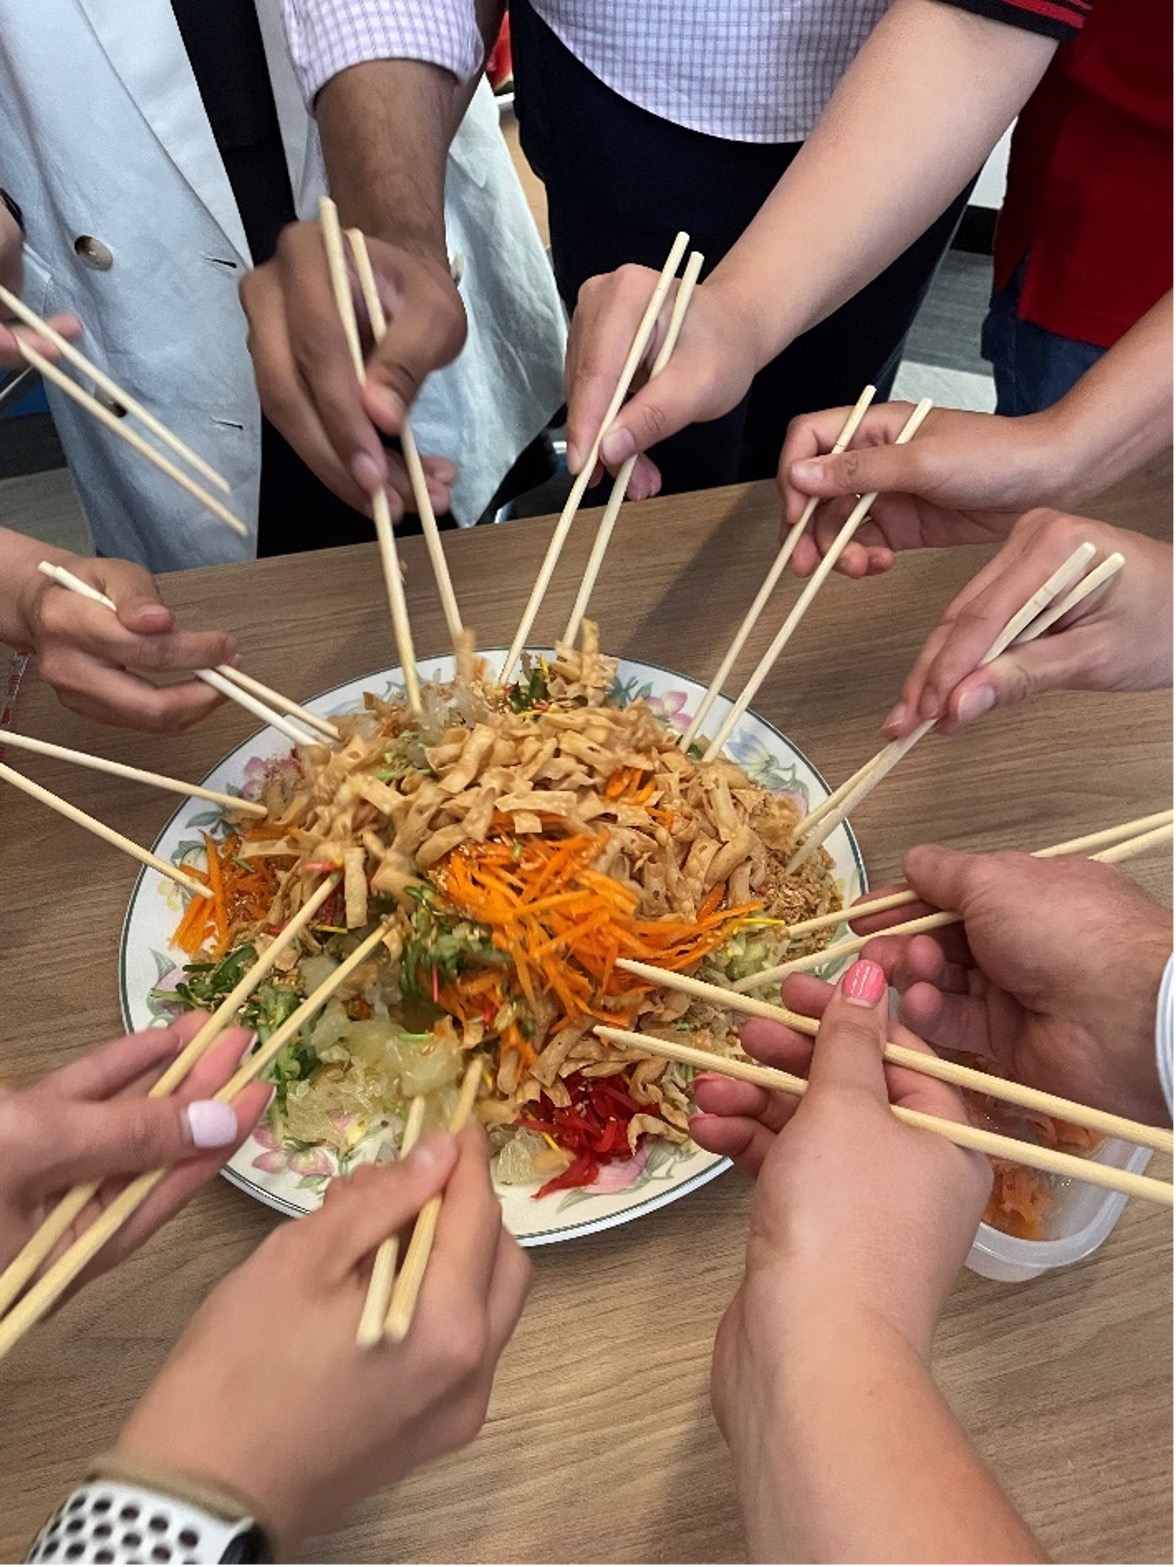 The UNSW Aviation team celebrates Chinese New Year by participating in the tossing of the Prosperity Salad